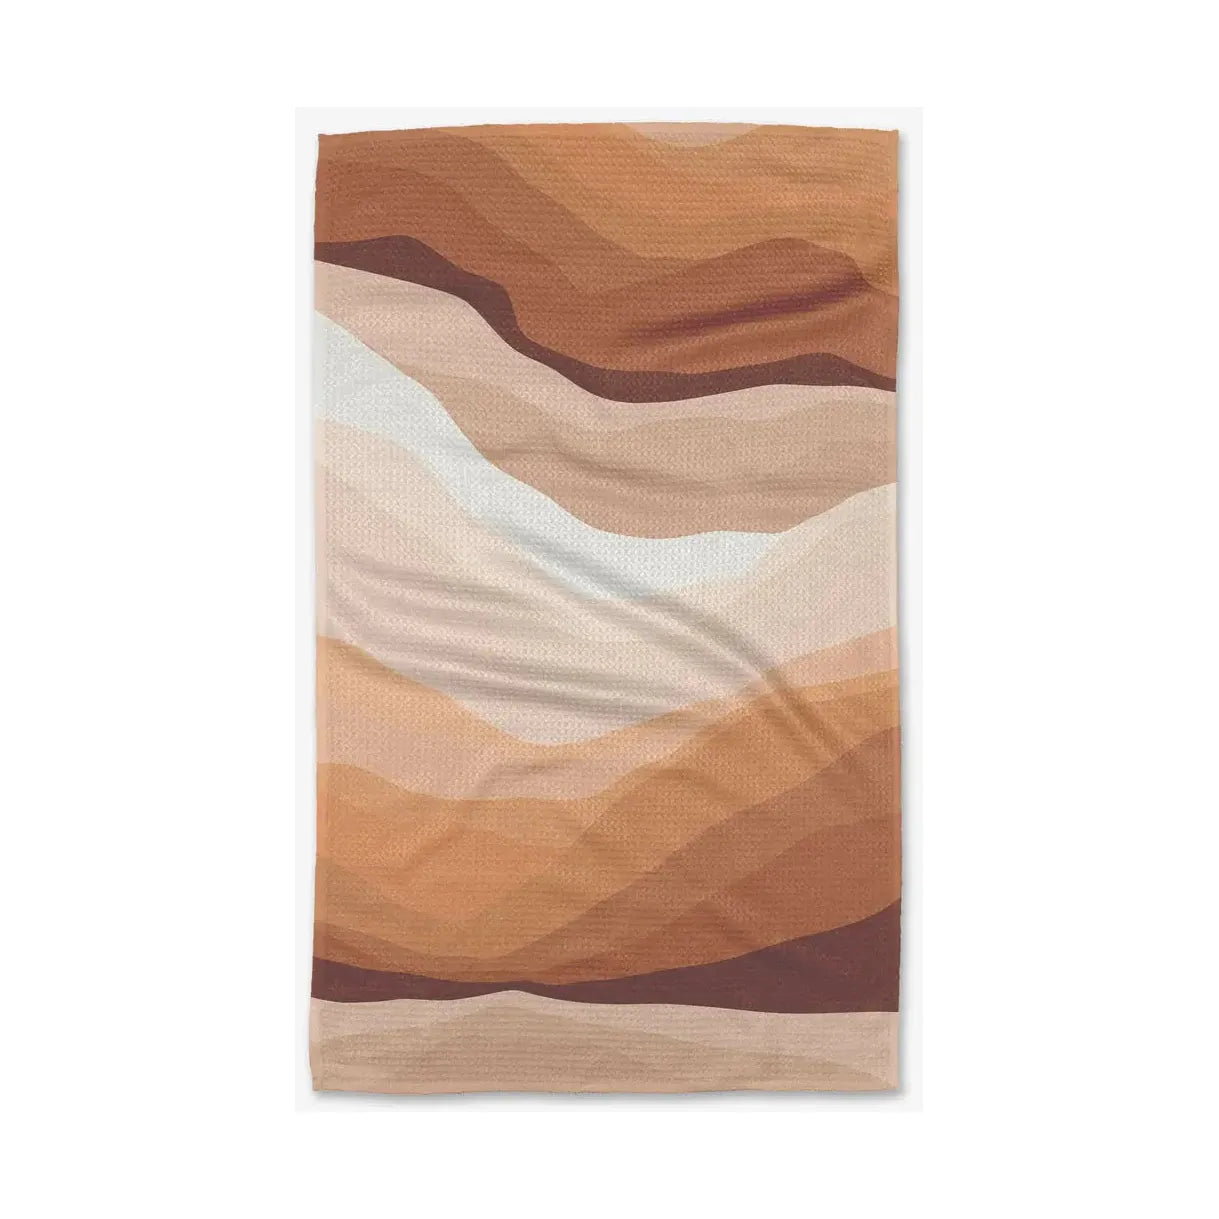 Geometry Levels of Fall Tea Towel Kitchen Towels Browns Kitchen